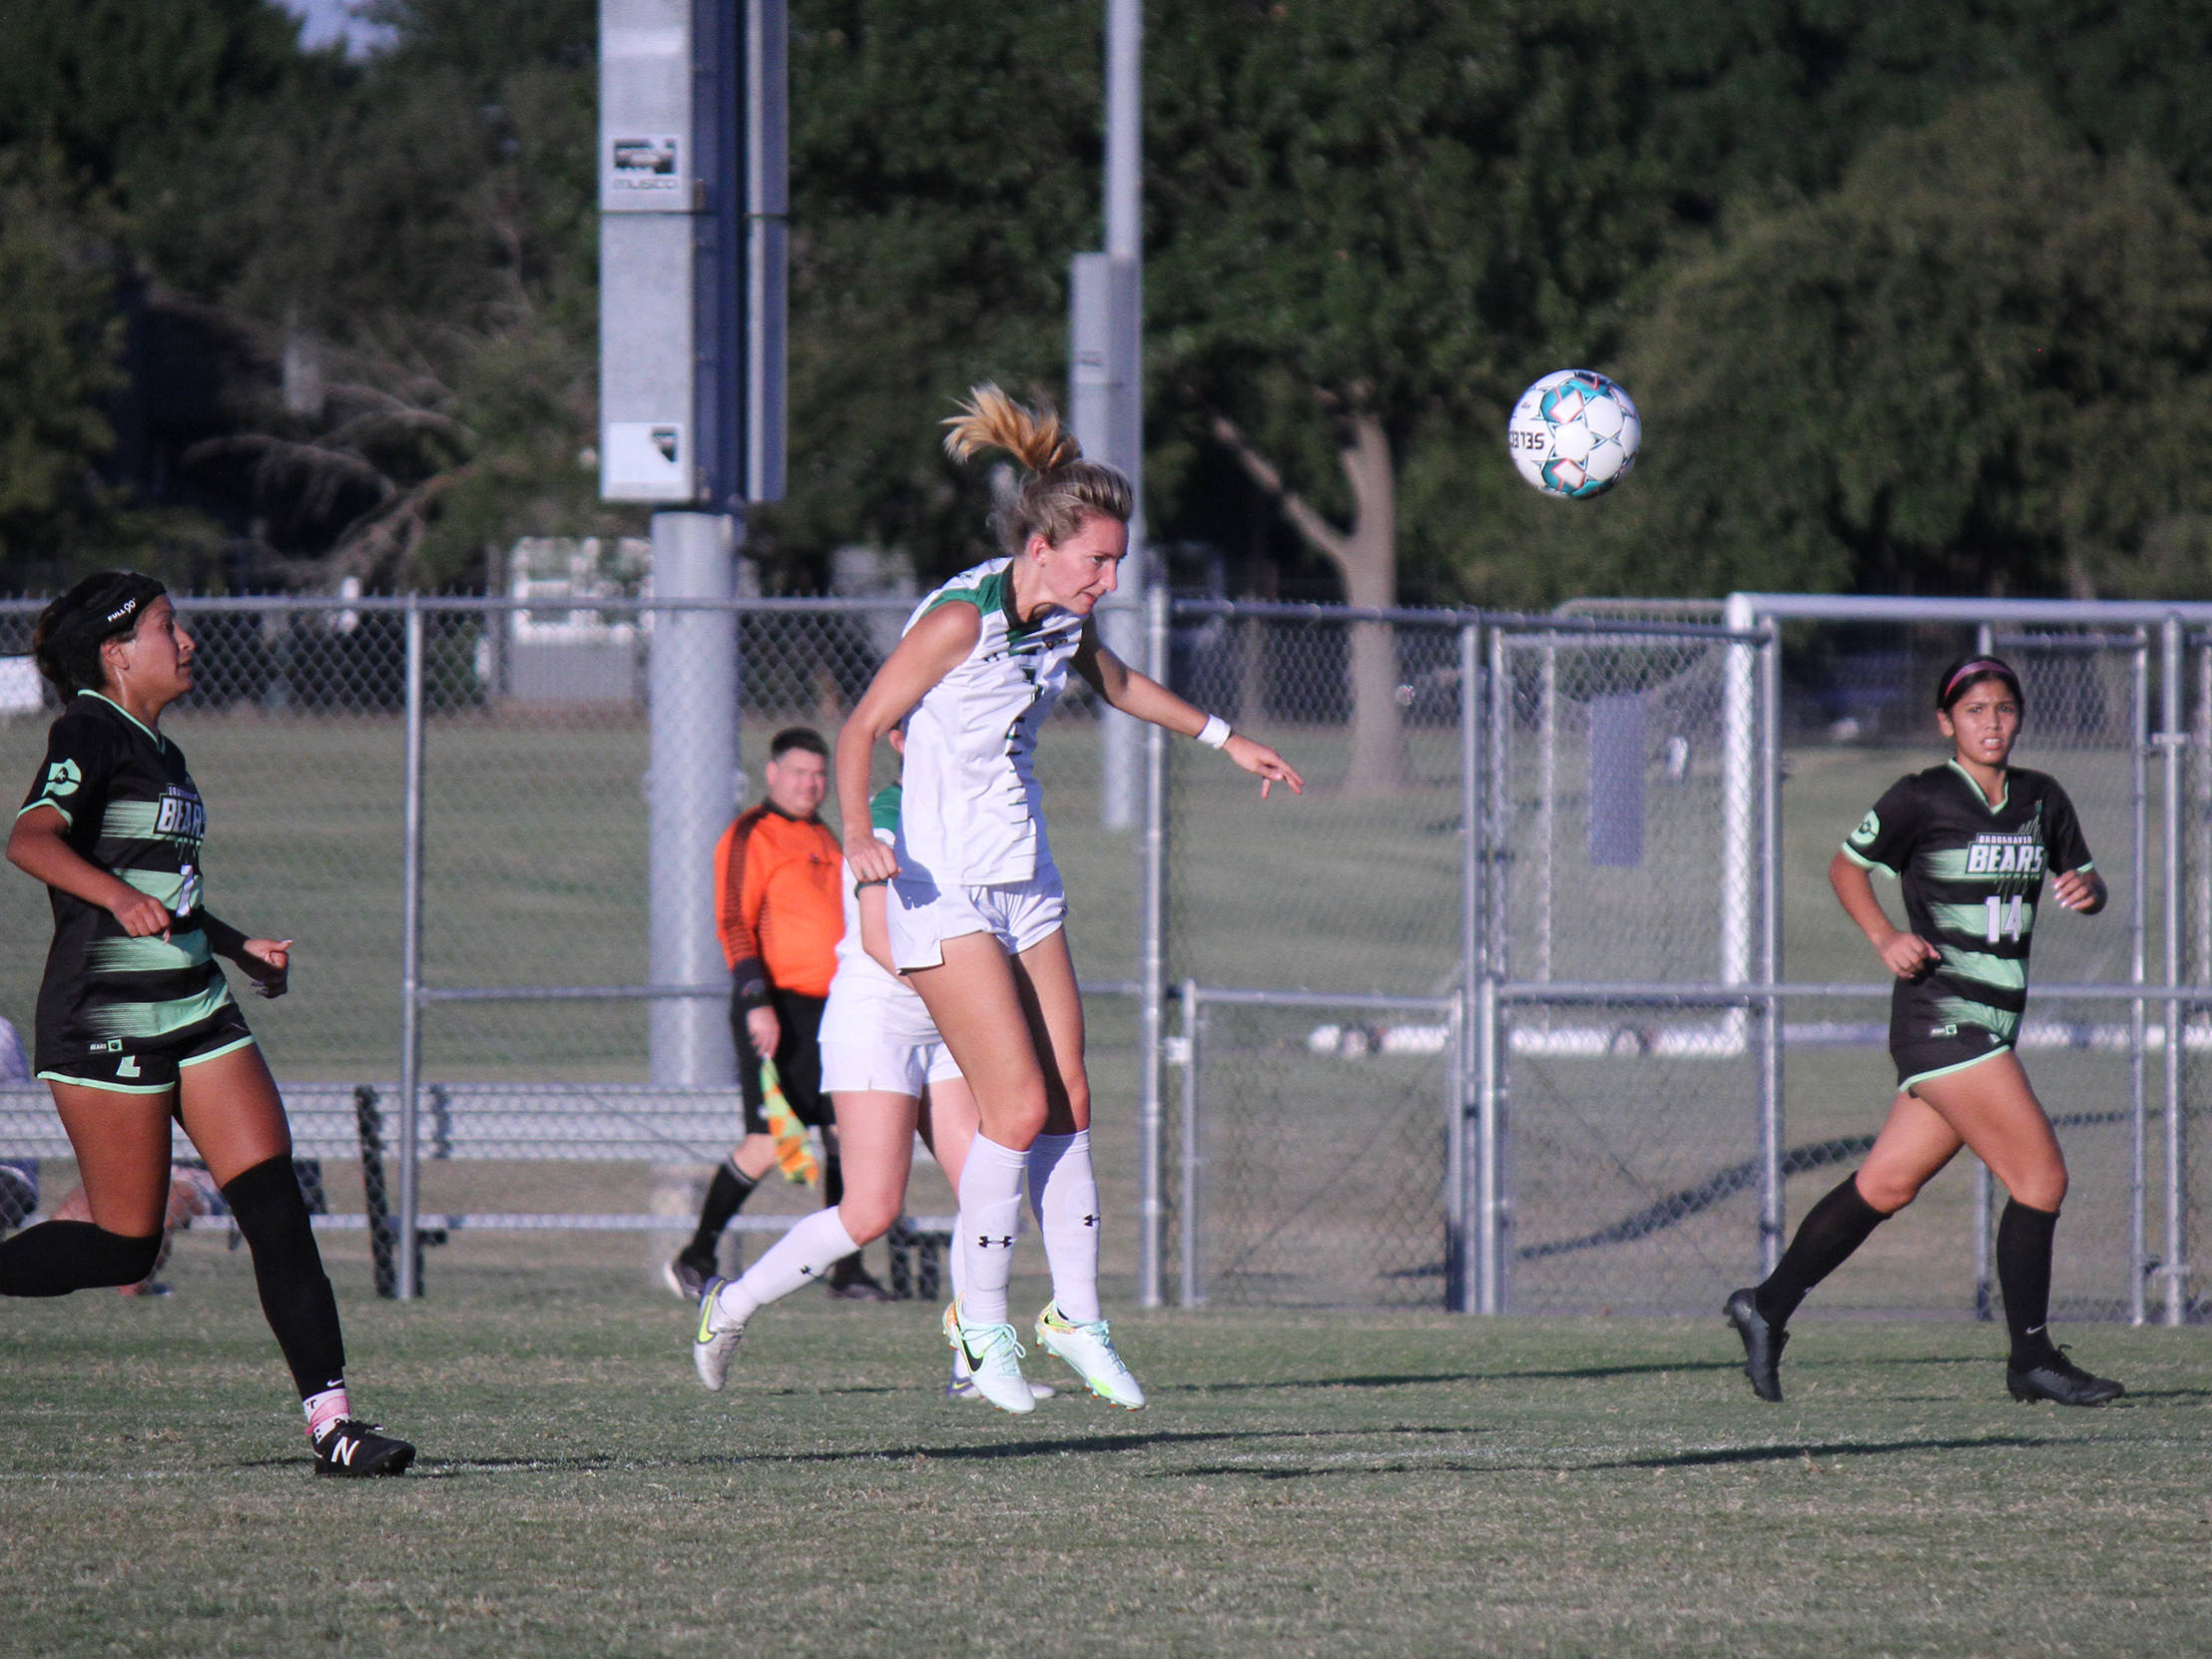 Dallas College Richland women's soccer earned a bye into next Thursday's NJCAA Division III Mid-South District semifinals at Dallas College Brookhaven.